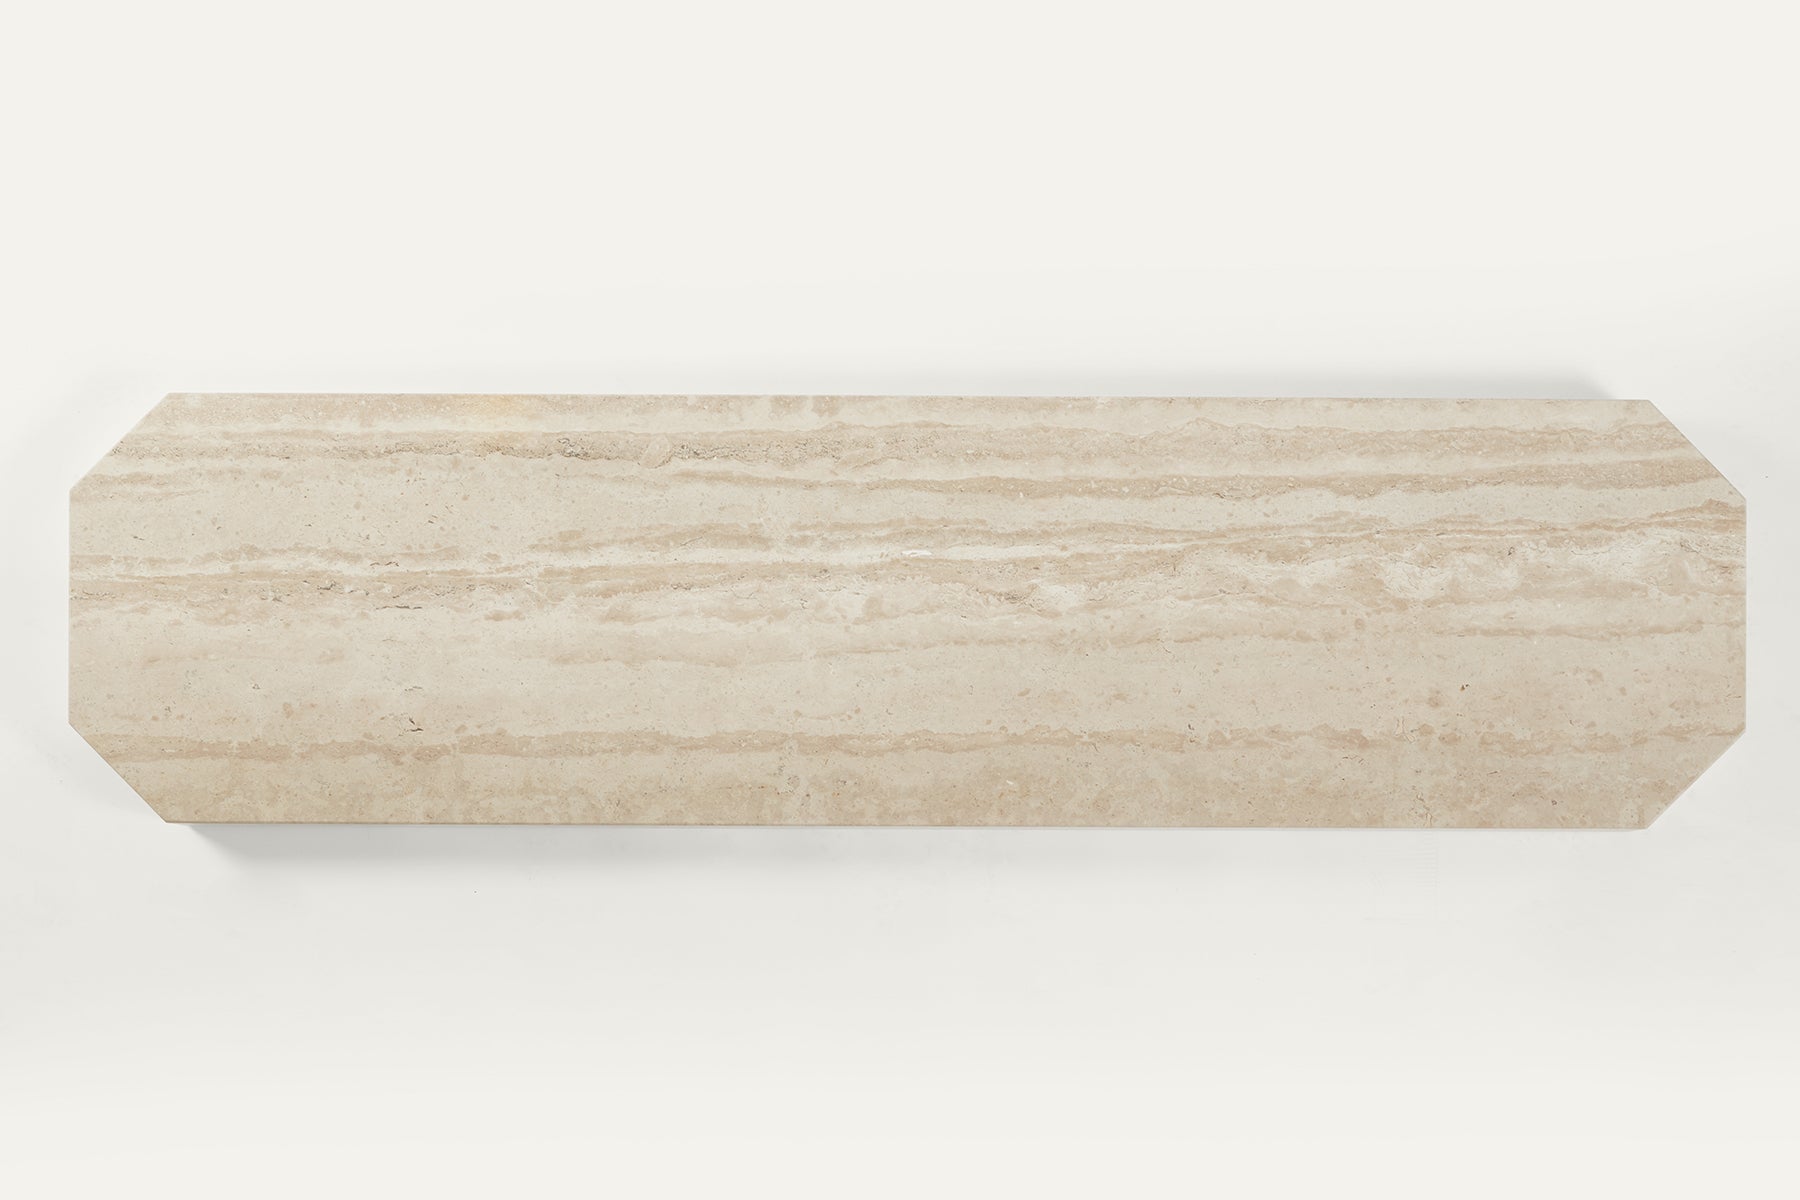 OCTAVIA 150cm Console Table in Filled & Honed Romano Travertine